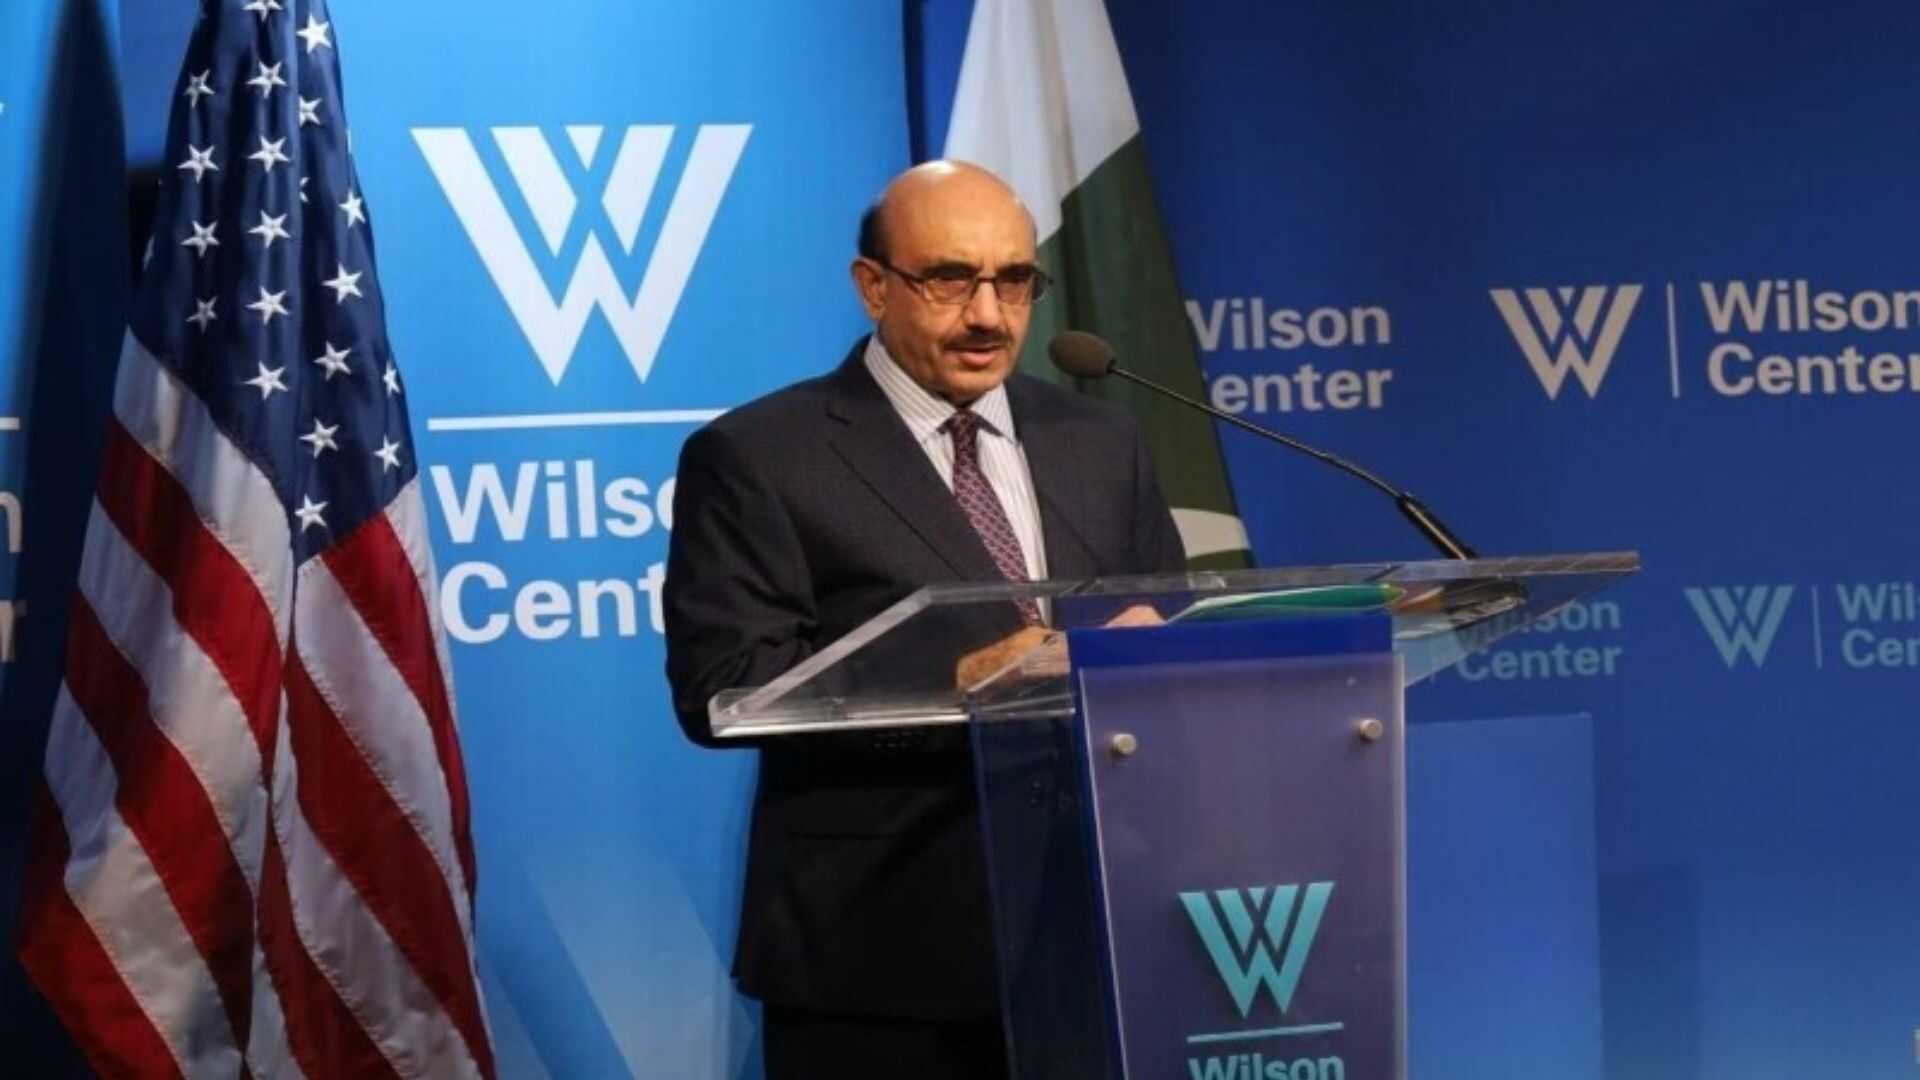 Pakistan Urges US For Small Arms And Modern Equipment To Boost Counter-Terrorism Efforts